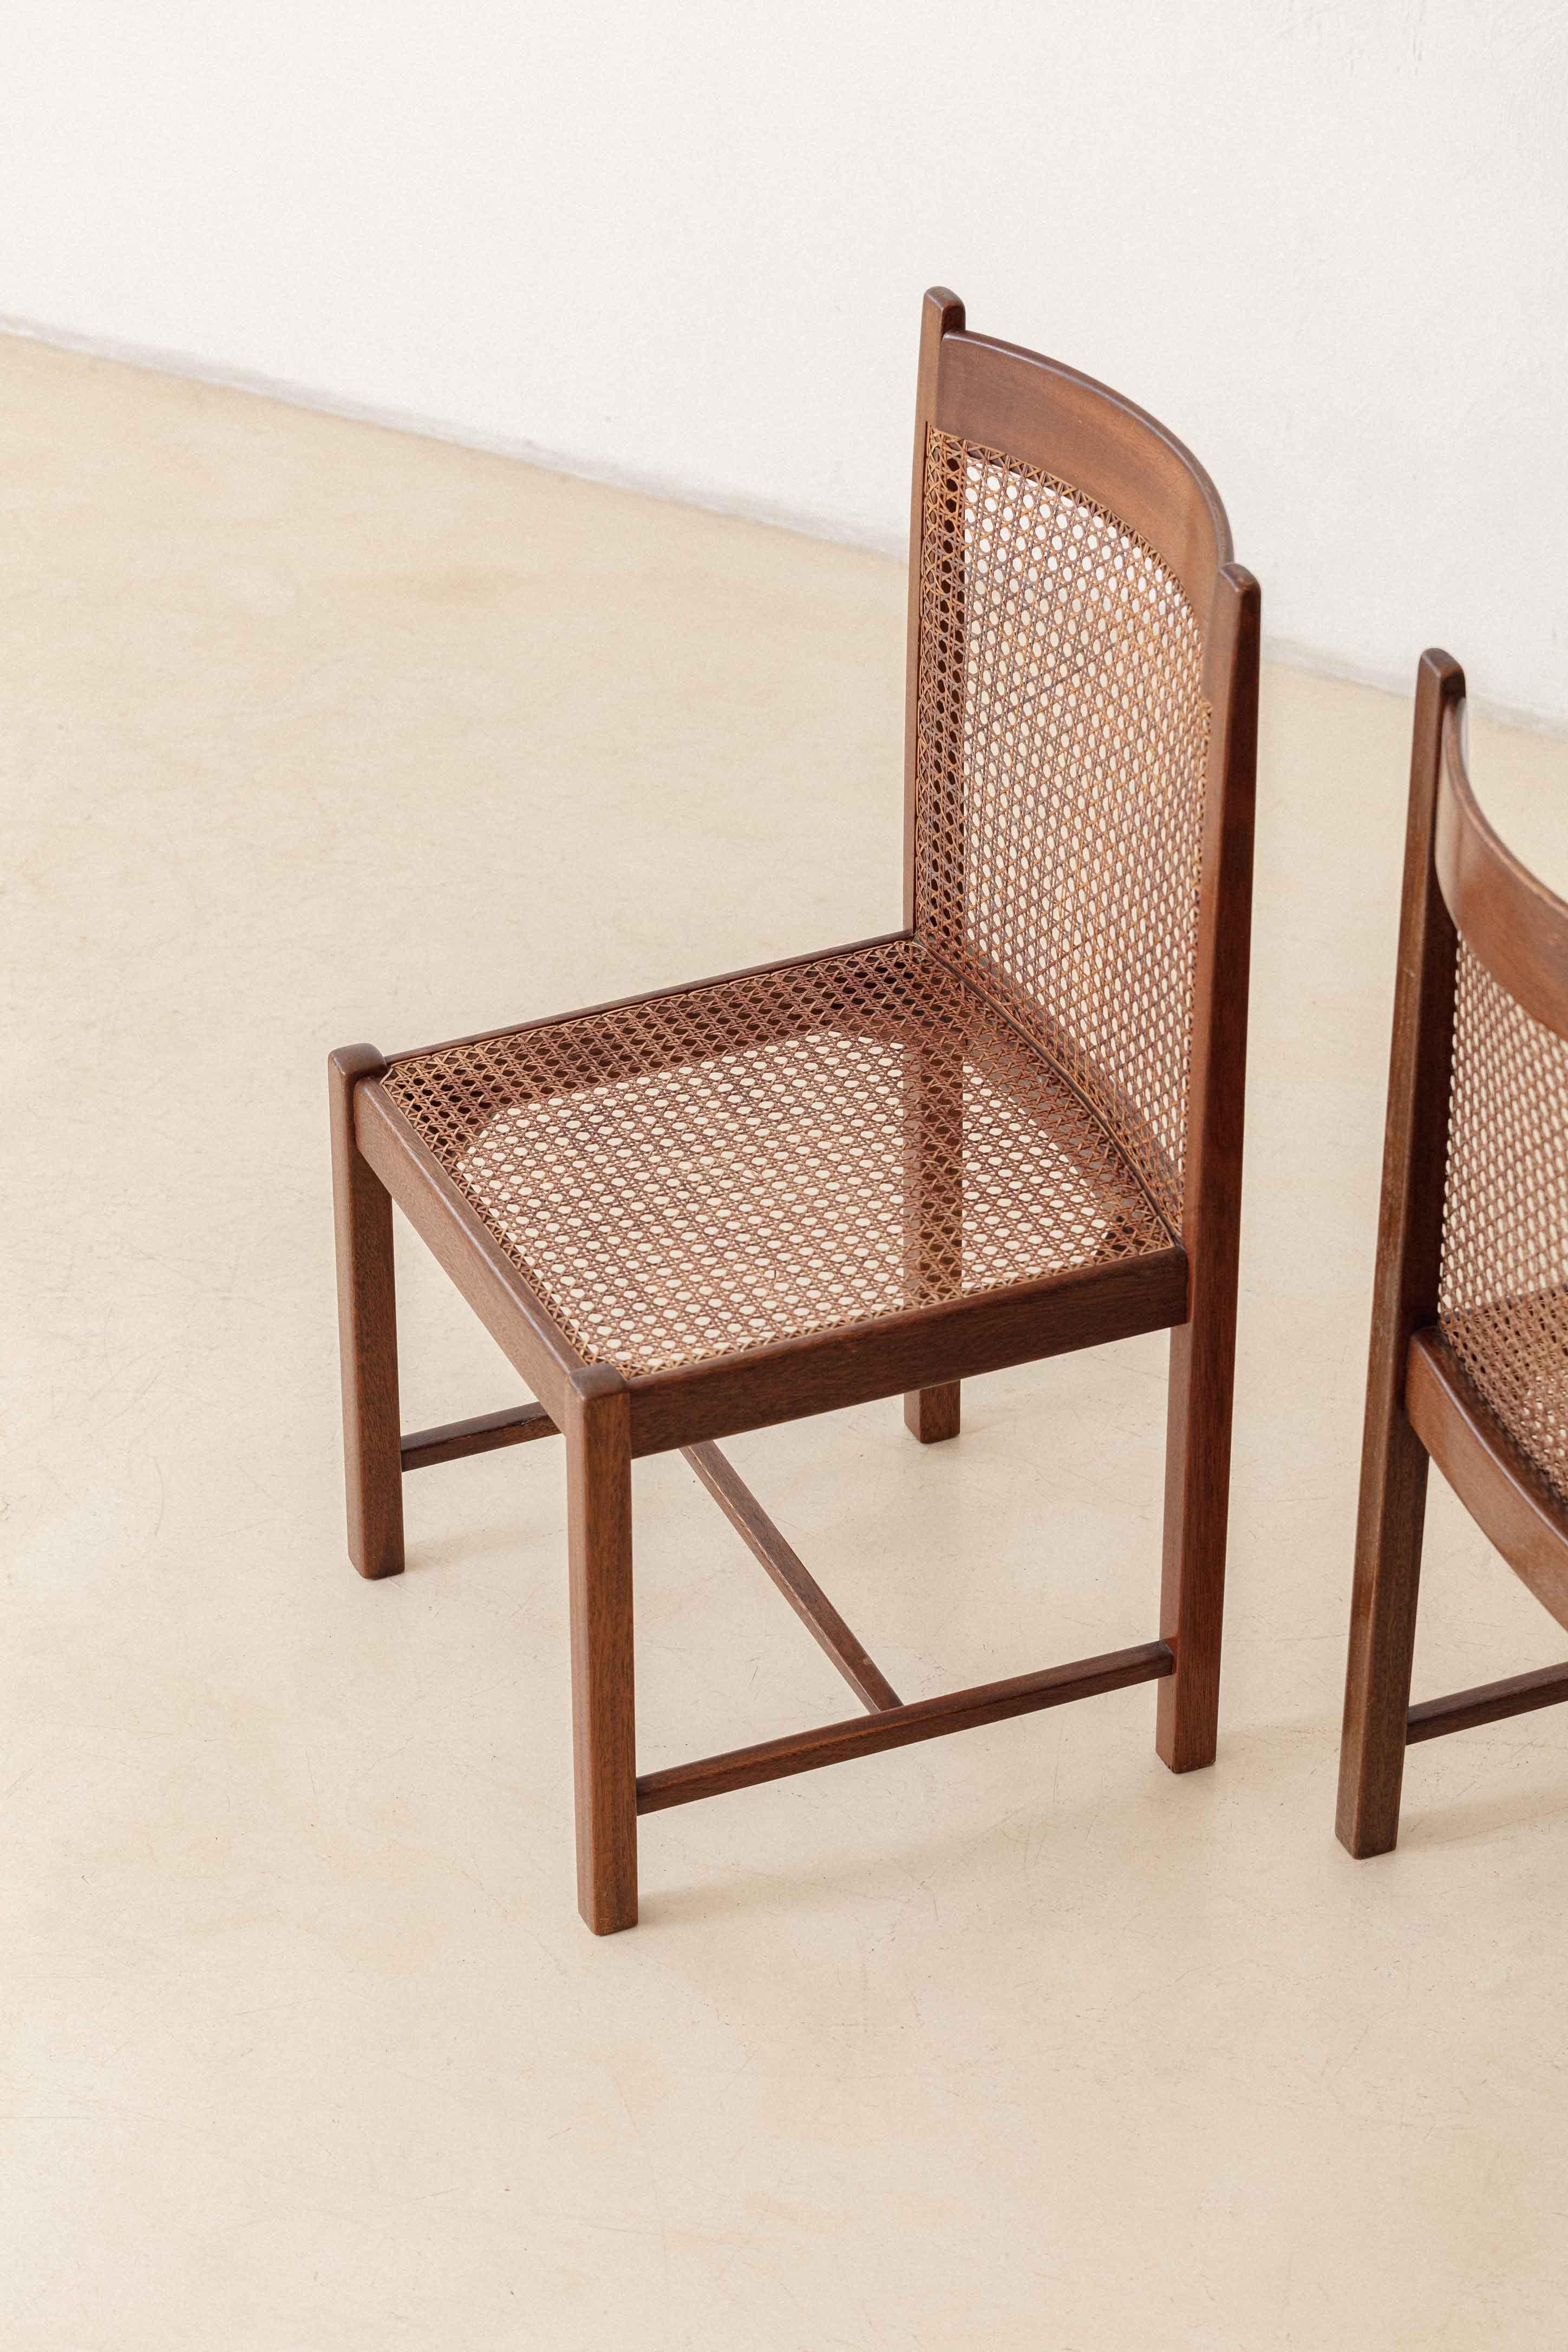 Brazilian Rosewood Dining Chairs by Fatima Arquitetura Interiores 'FAI', 1960s For Sale 8